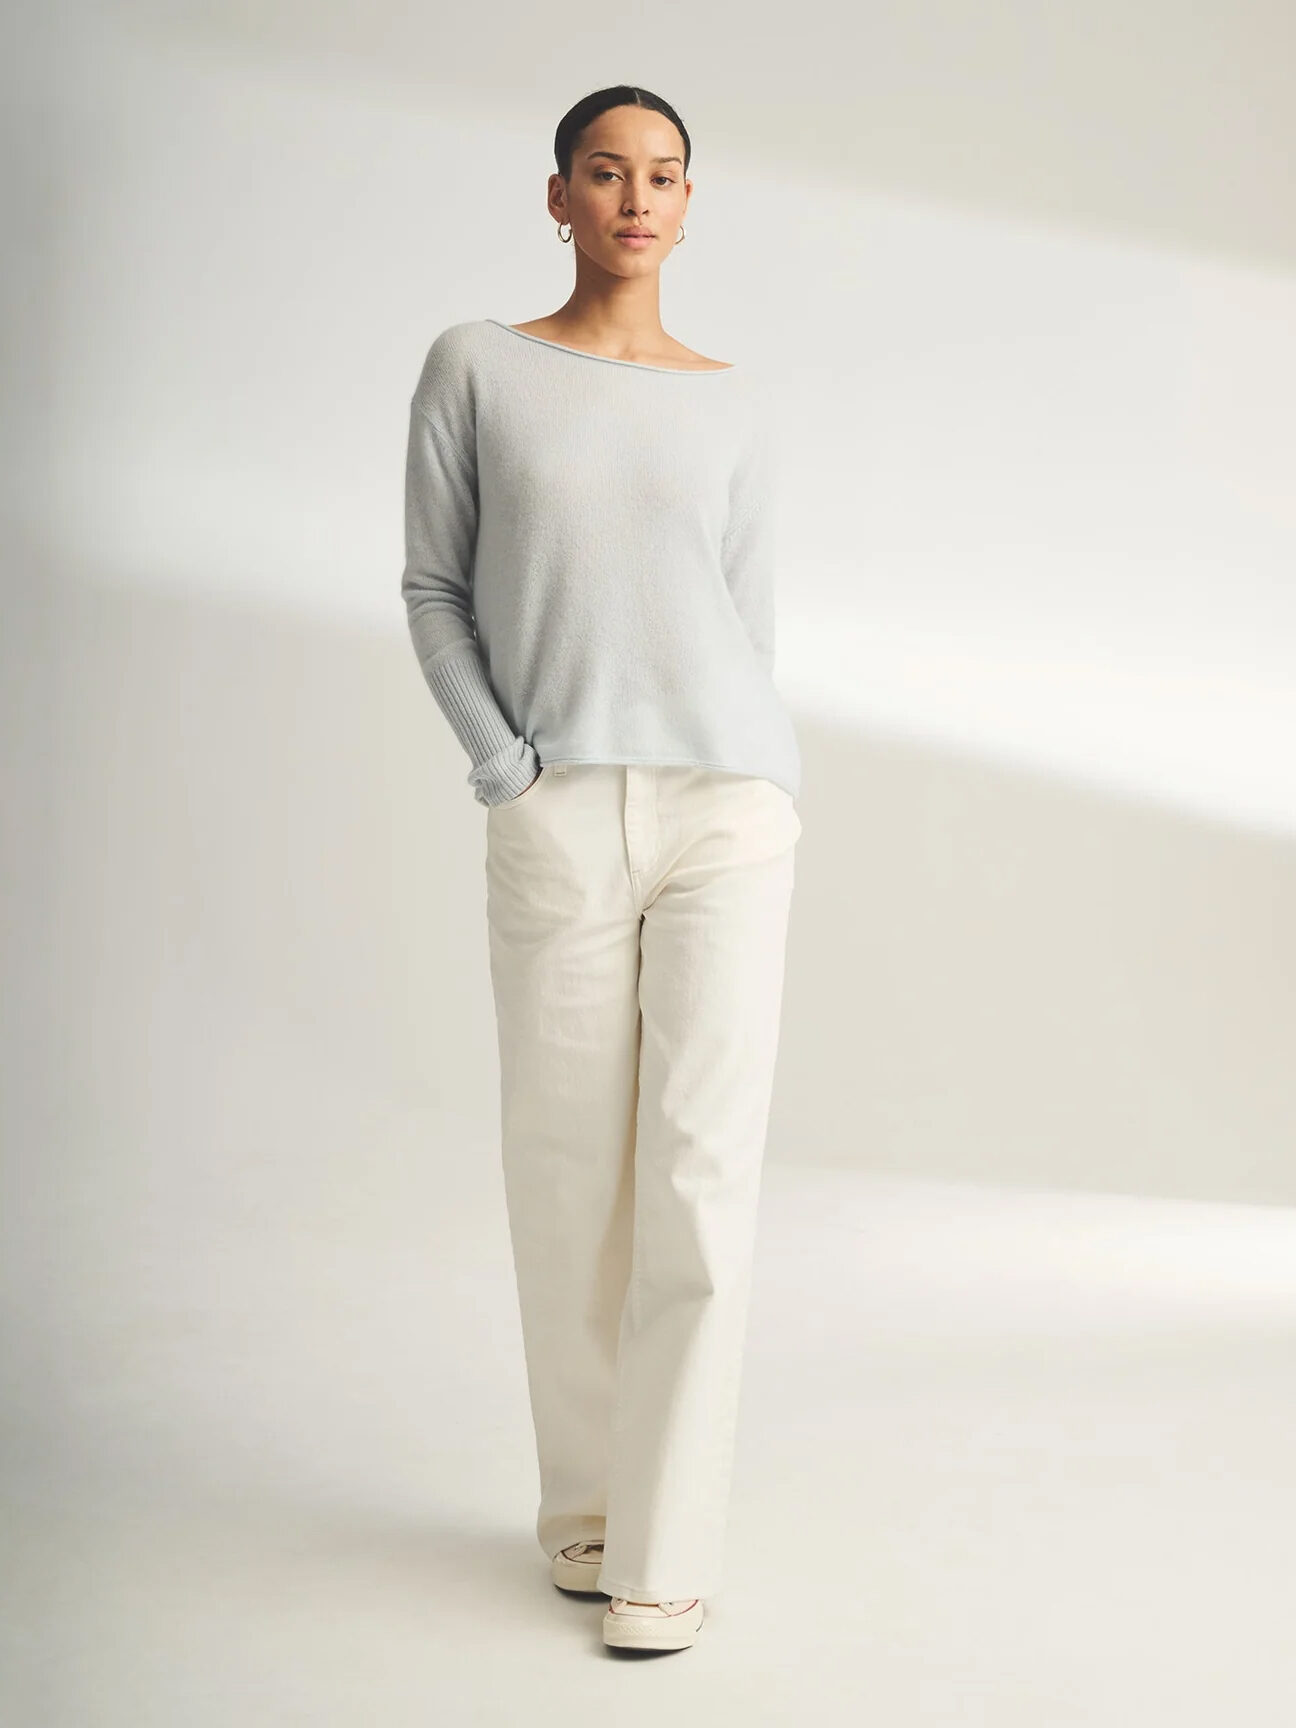 Woman in a light grey sweater and white trousers standing against a neutral background.